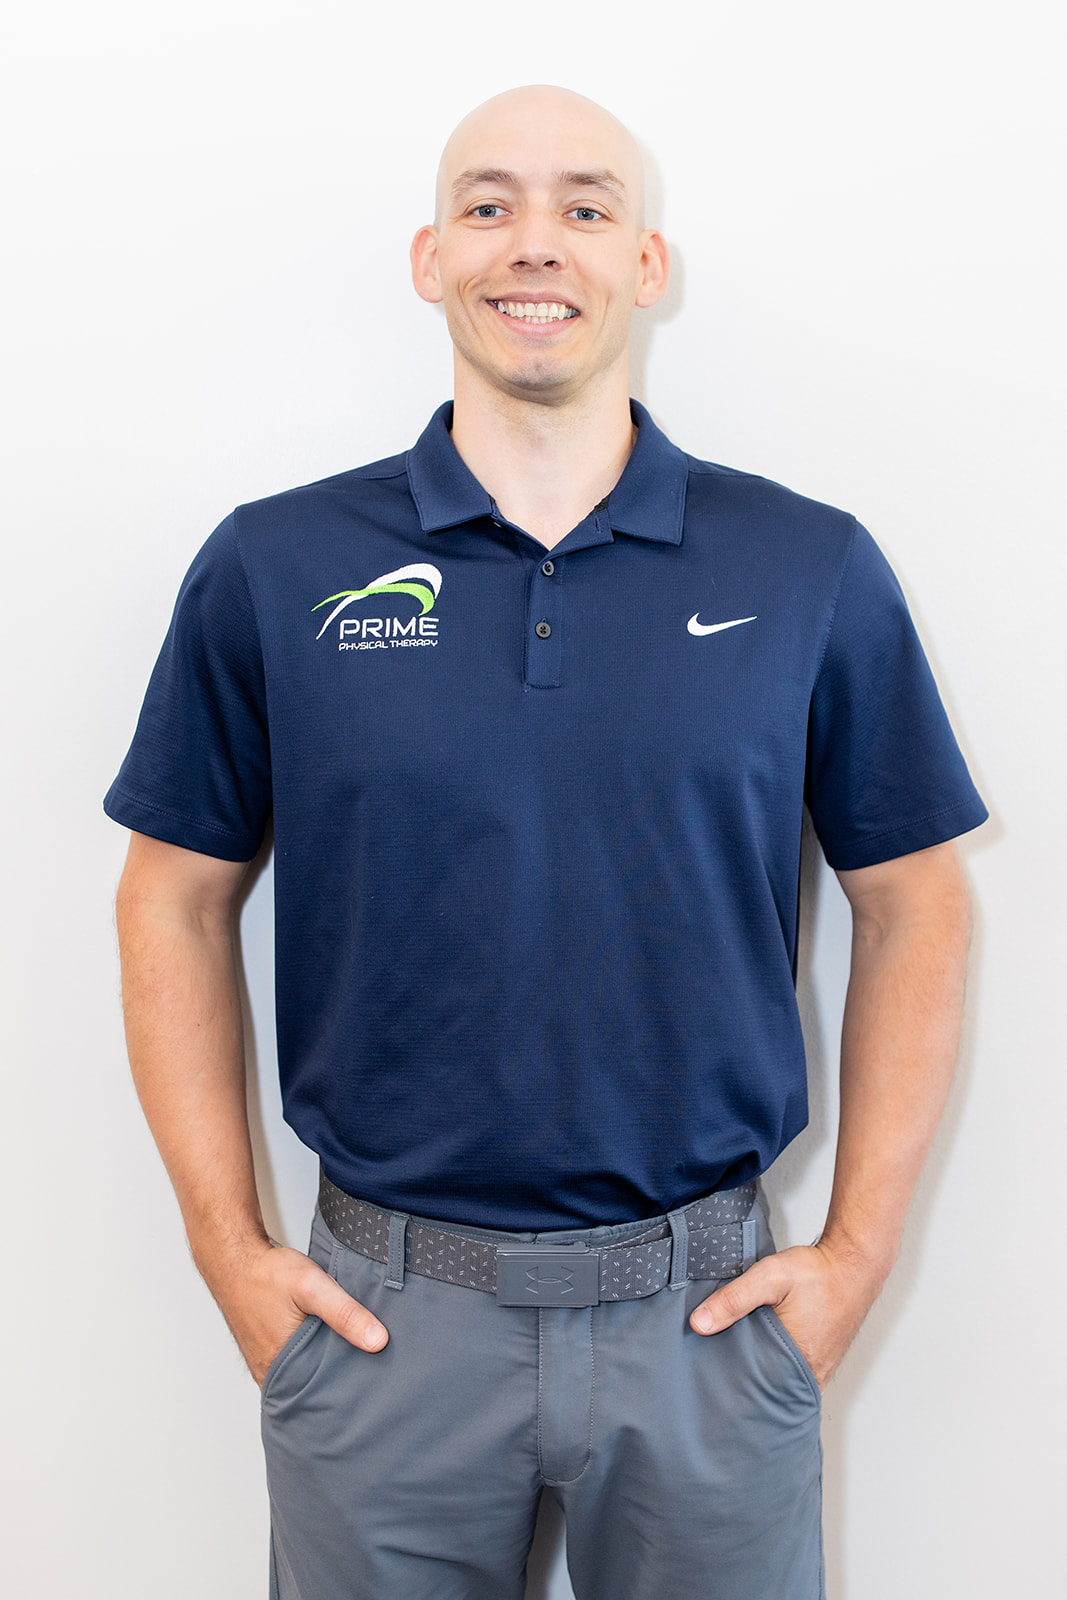 Dr. Jon Coulson biography photo, physical therapist at PRIME Physical Therapy